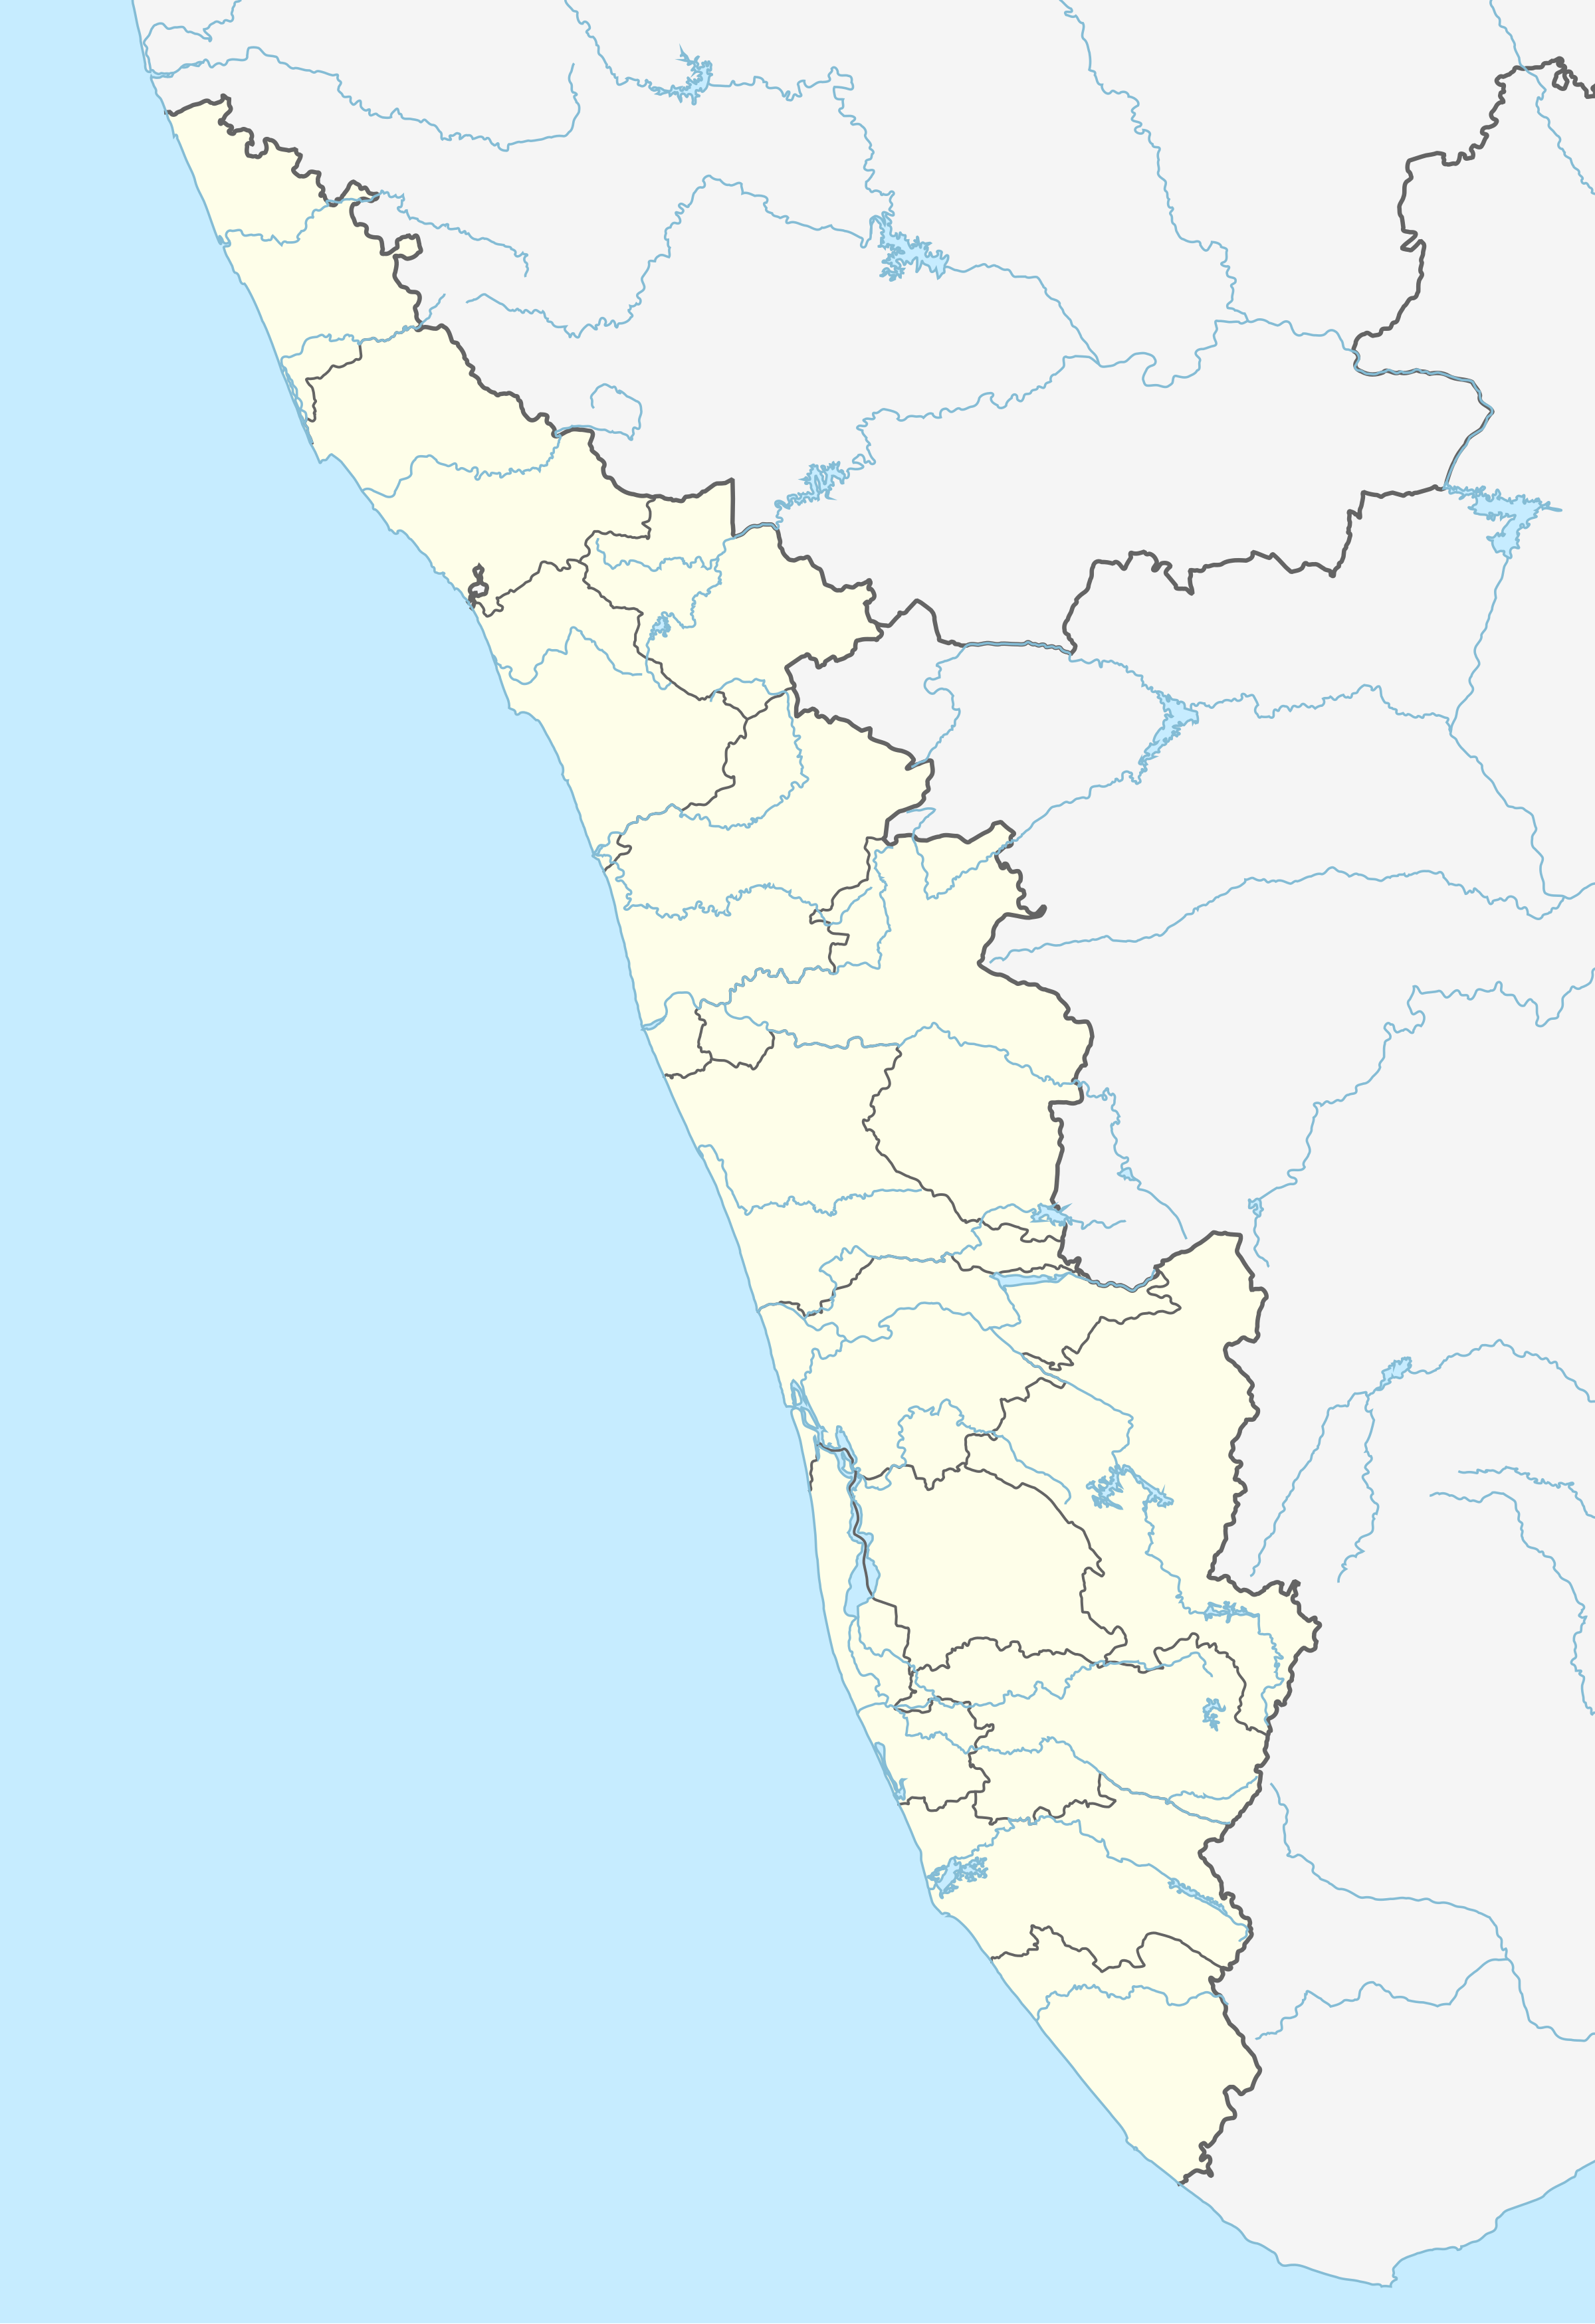 Pachalam is located in Kerala